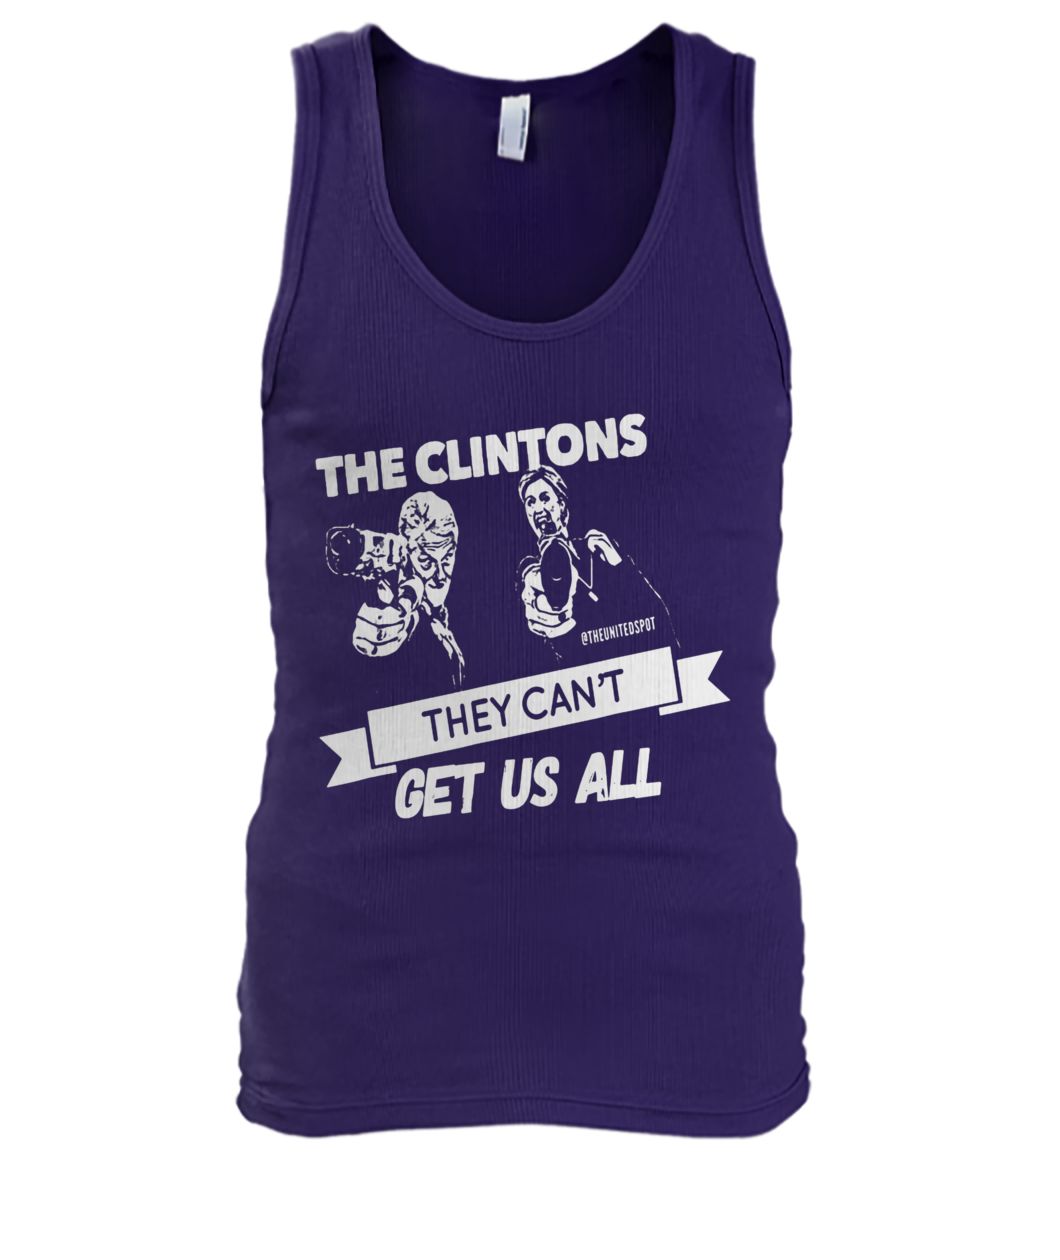 Hillary clinton they can't suicide us all men's tank top